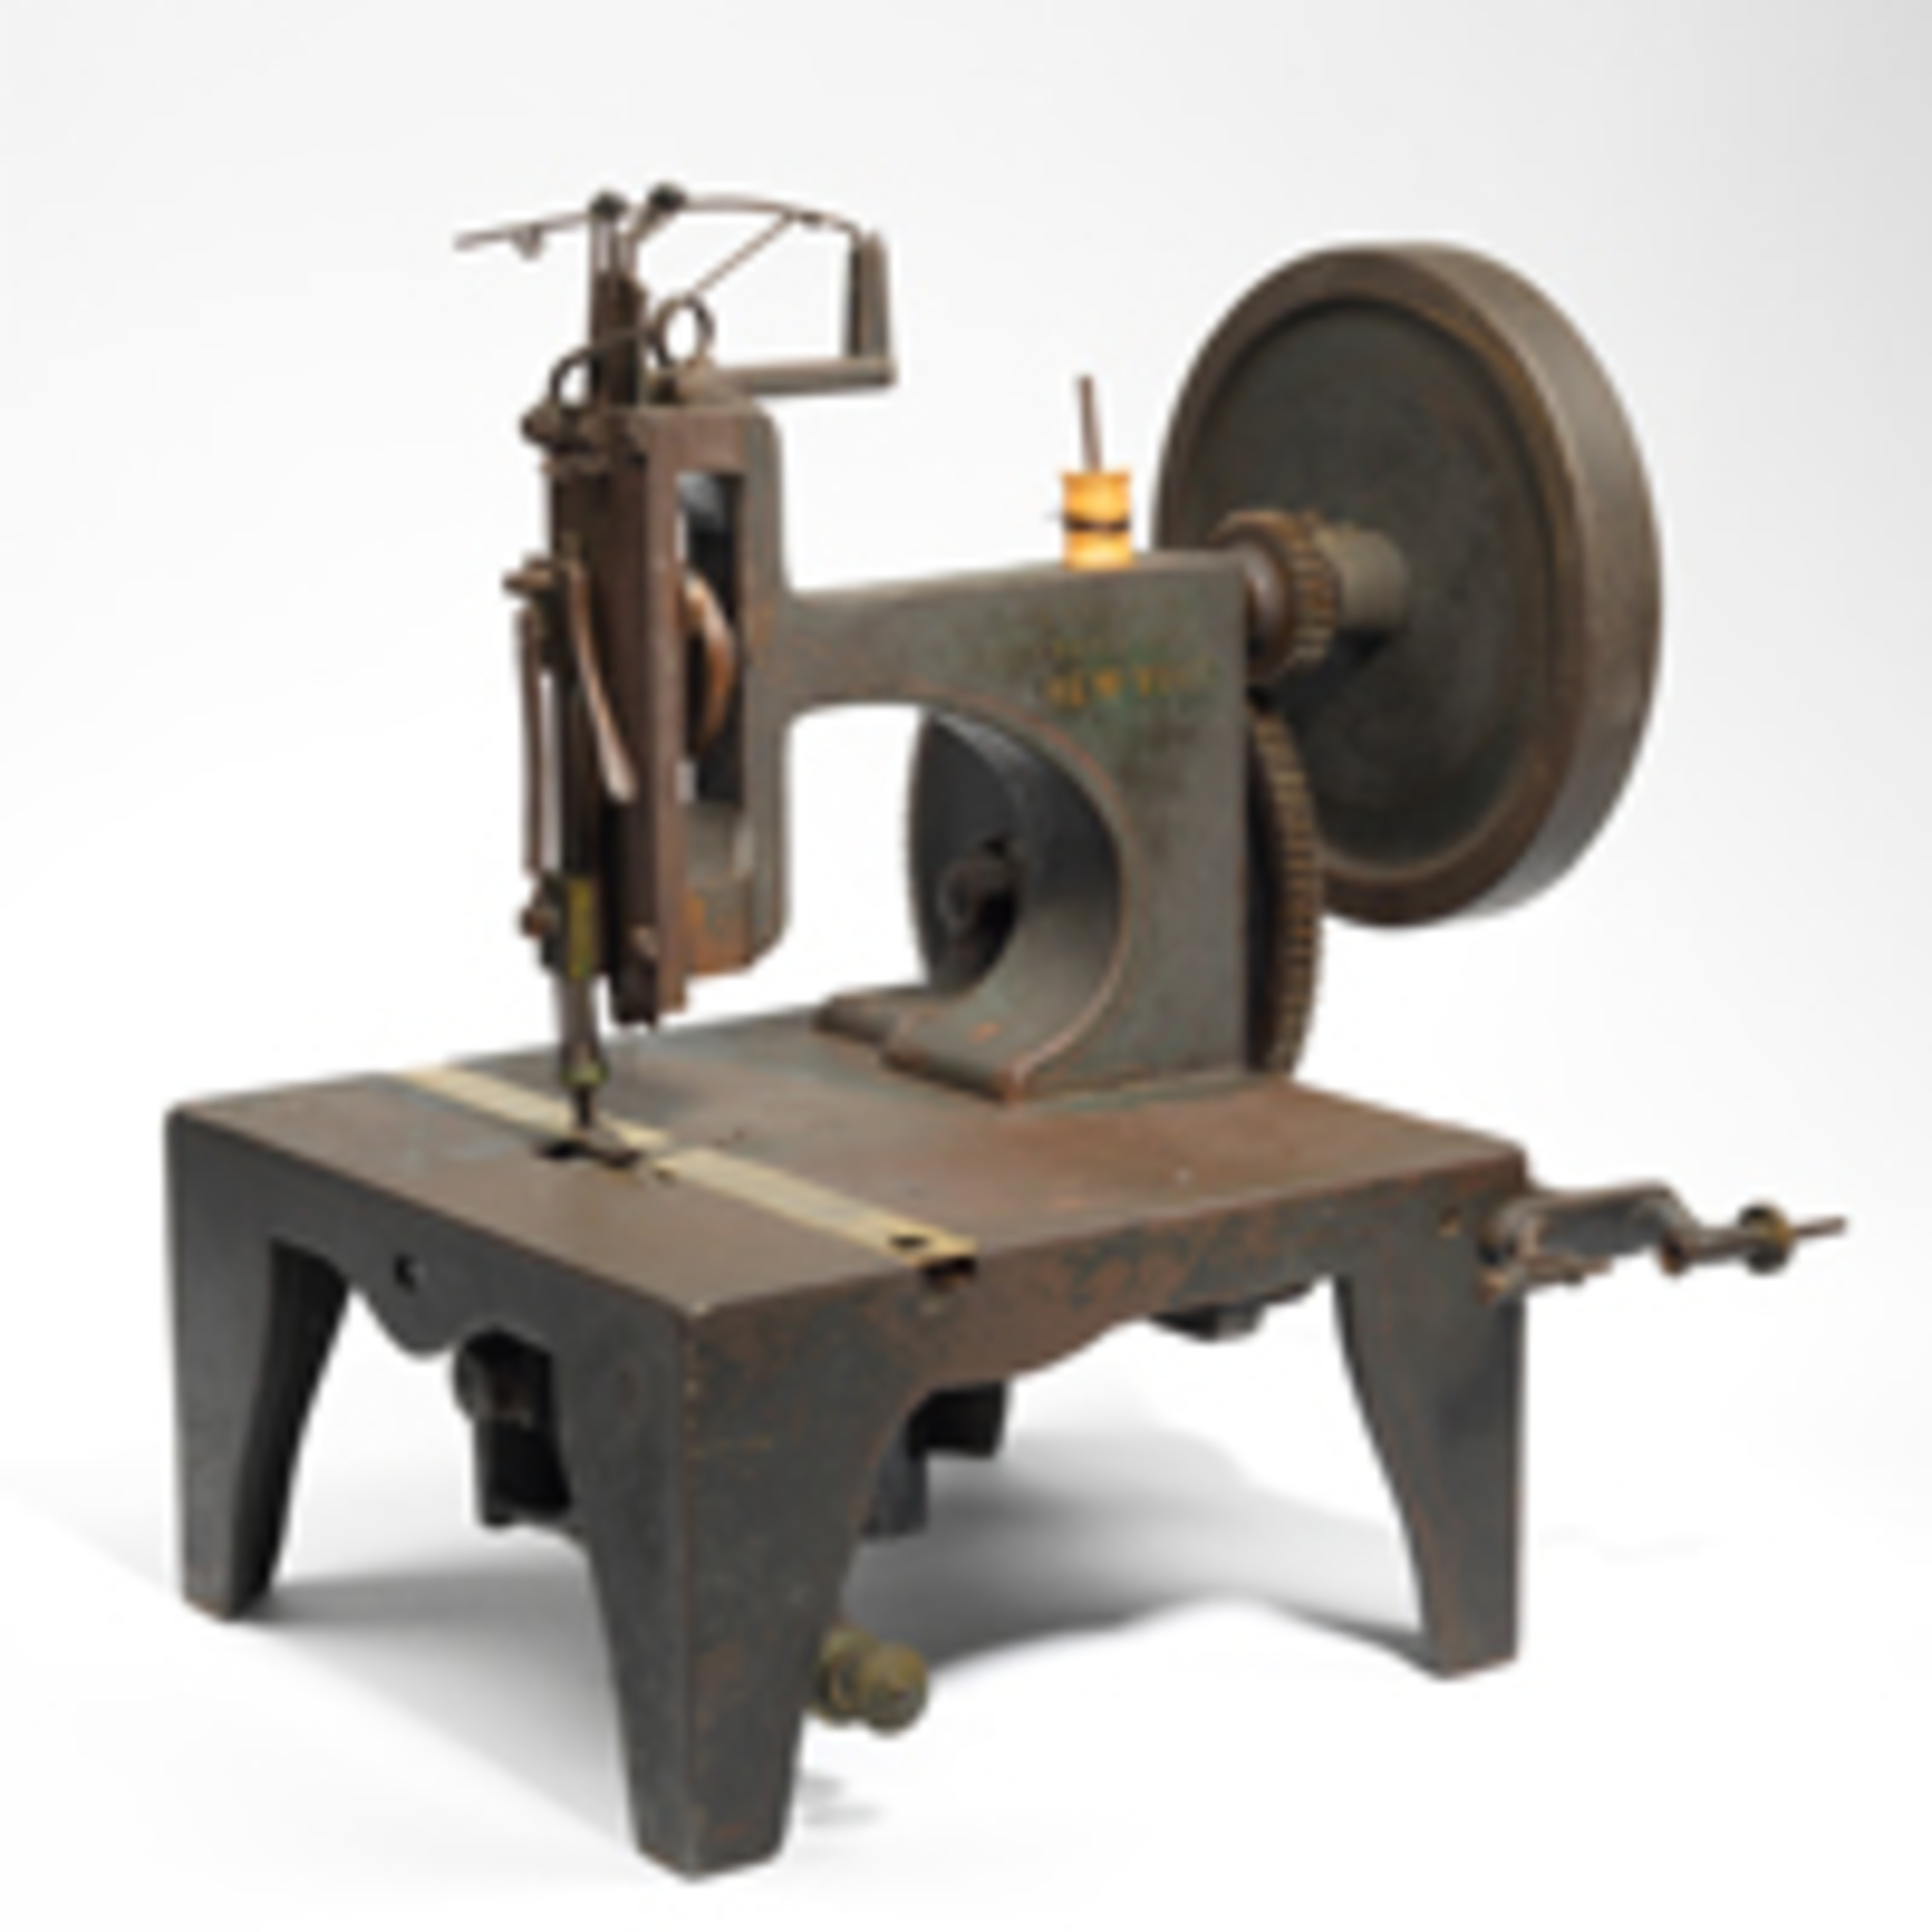 1851 - Isaac Singer's Sewing Machine Patent Model